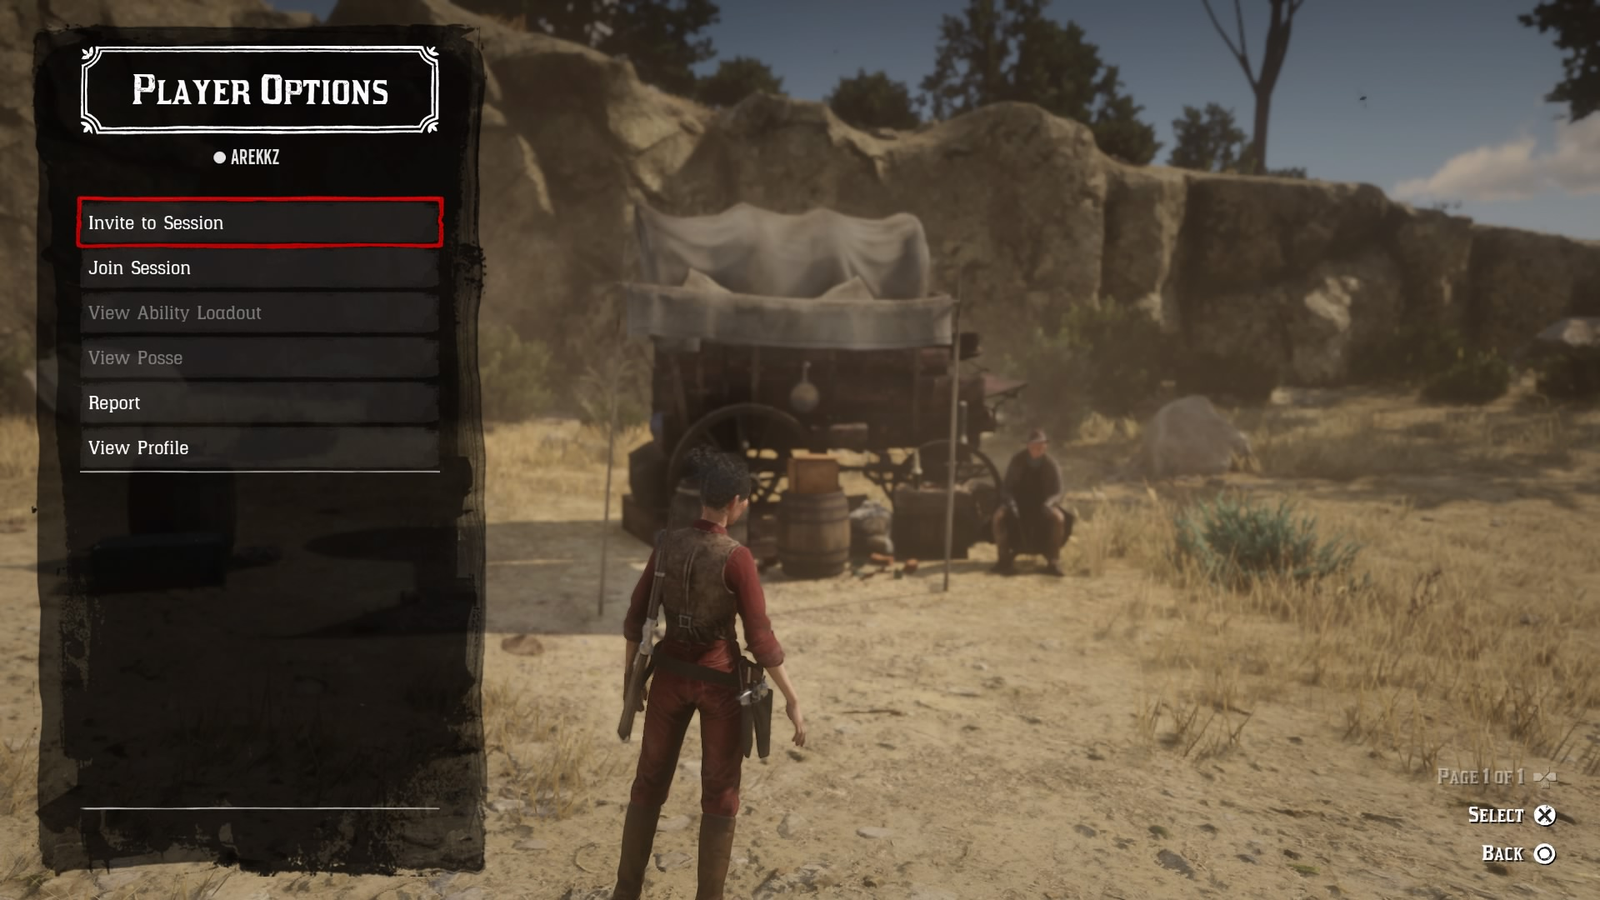 We got the whole crew out here! (Red Dead Redemption online, PS3) : r/PS3